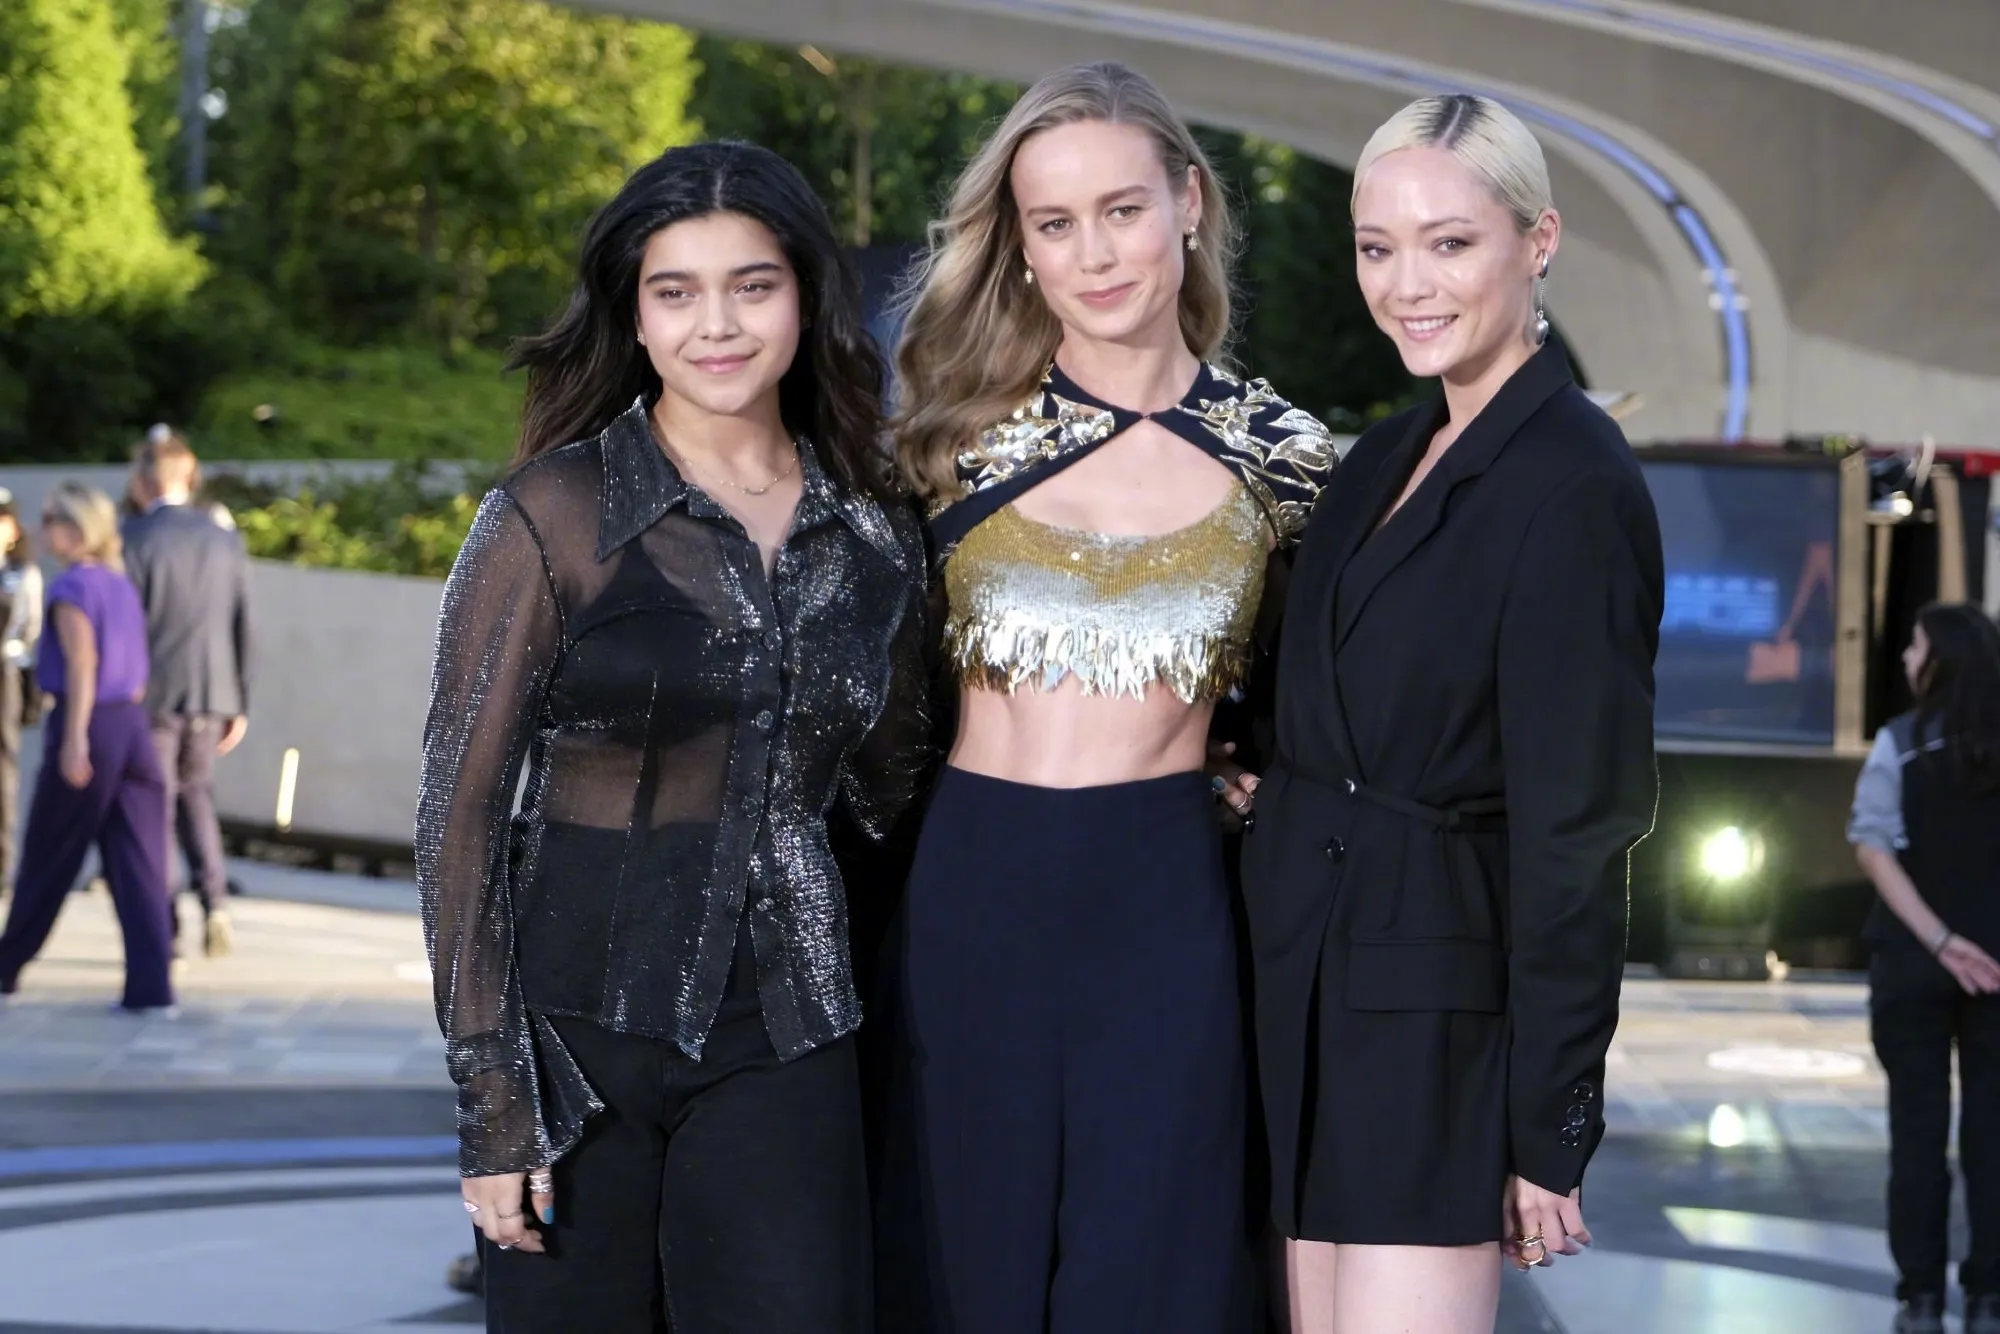 Brie Larson, Iman Vellani and Pom Klementieff attend the opening of "The Avengers" park at Disneyland Paris | FMV6